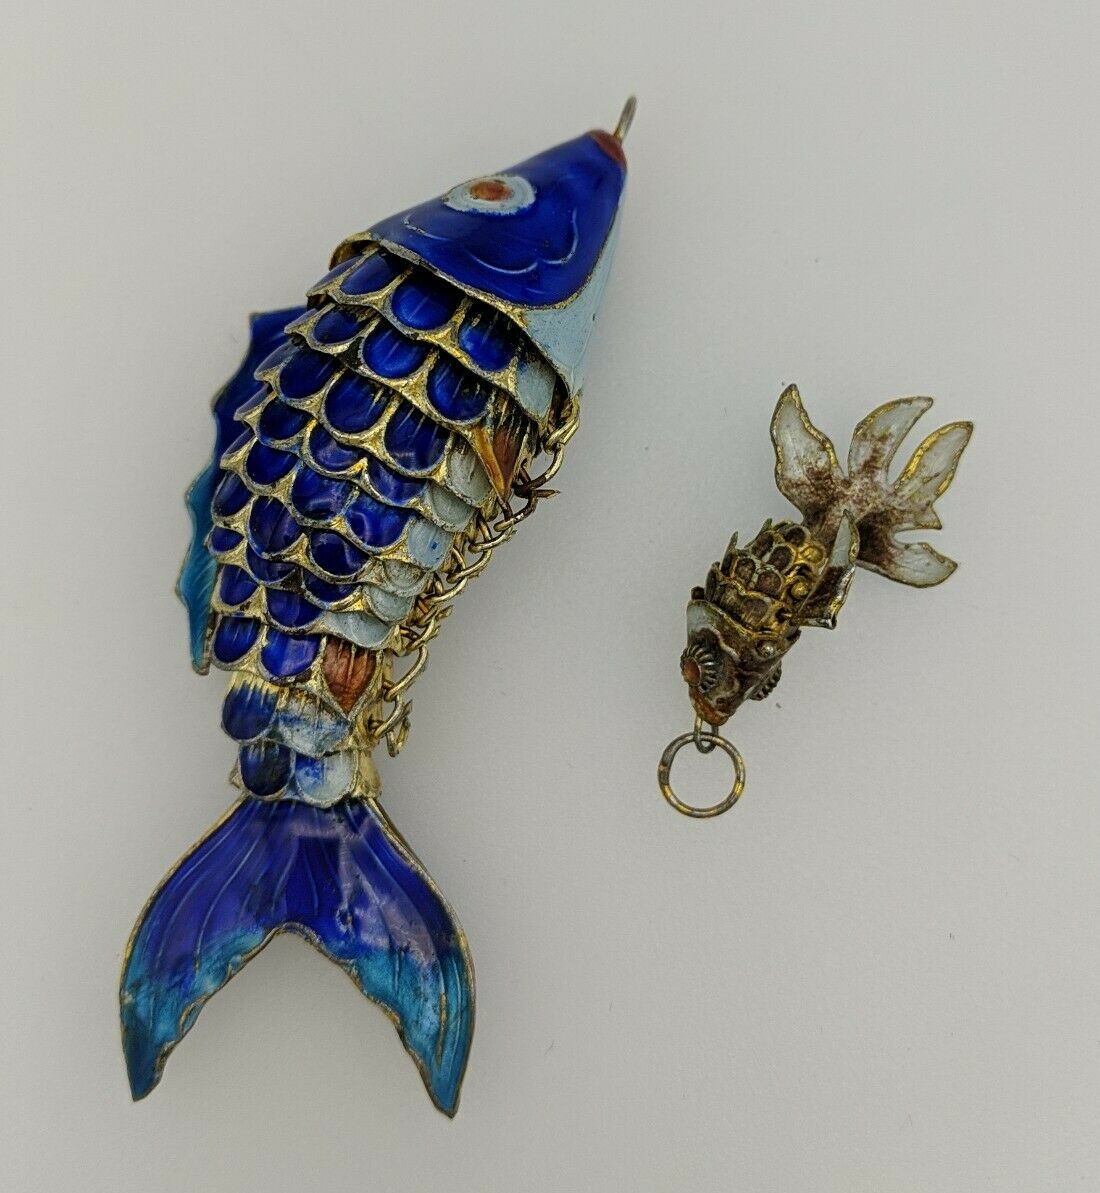 Large Vtg 3" Chinese Cloisonne Articulated Blue Enamel Koi Fish Lot 1" Small